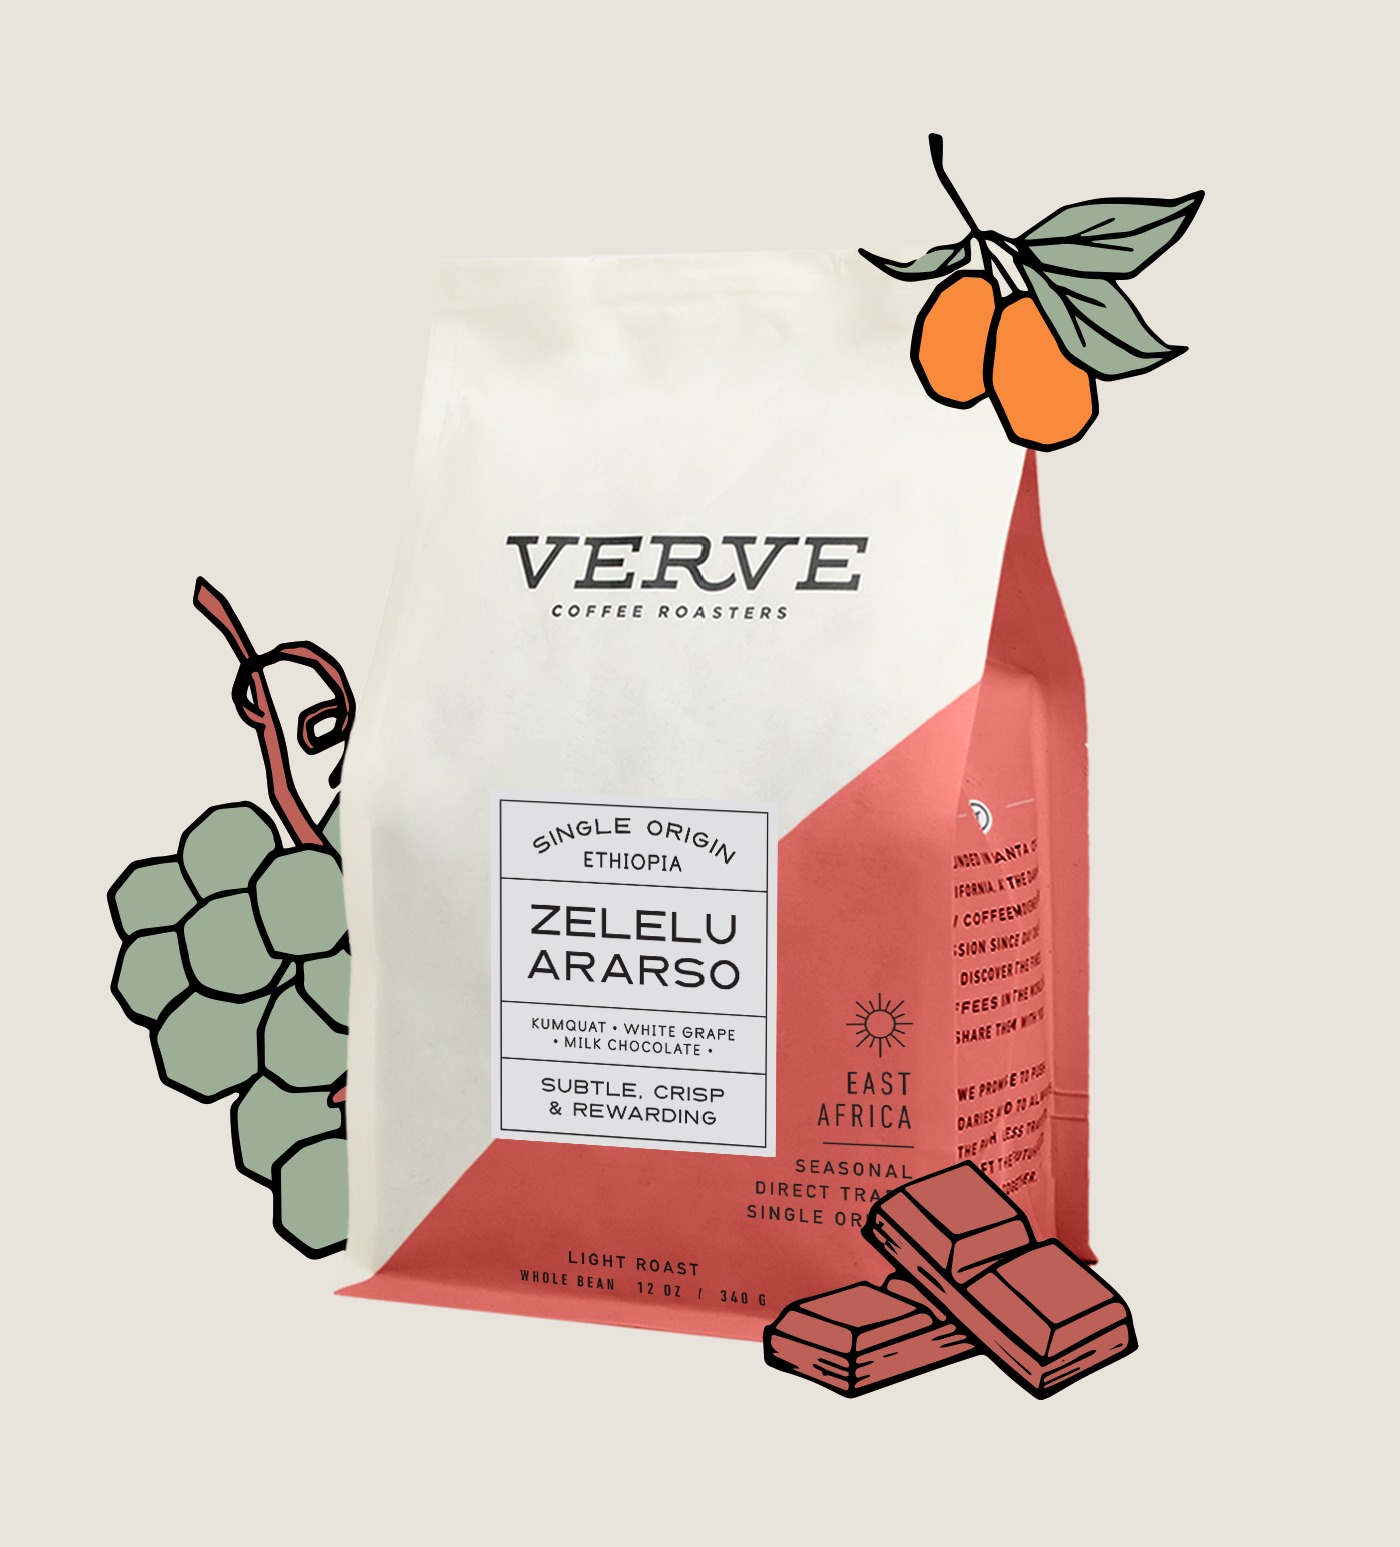 Zelelu Ararso whole bean with tasting notes